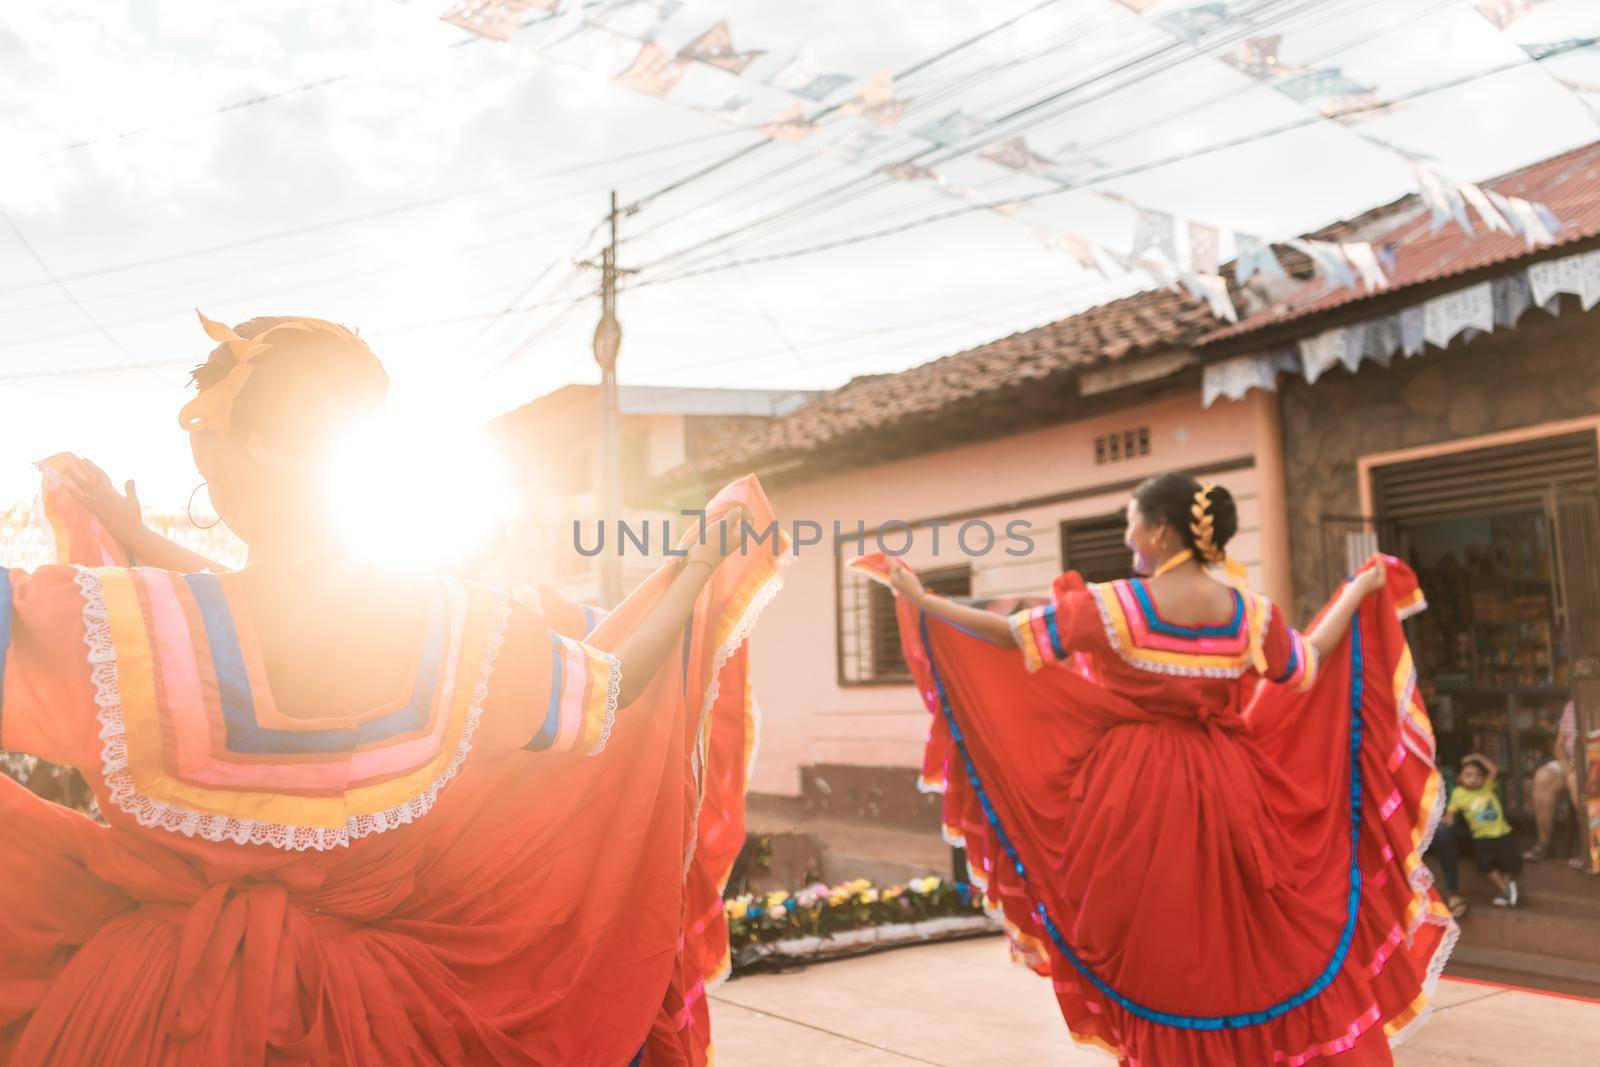 Traditional Nicaraguan dancers with typical tajes dancing on an outdoor stage during sunset